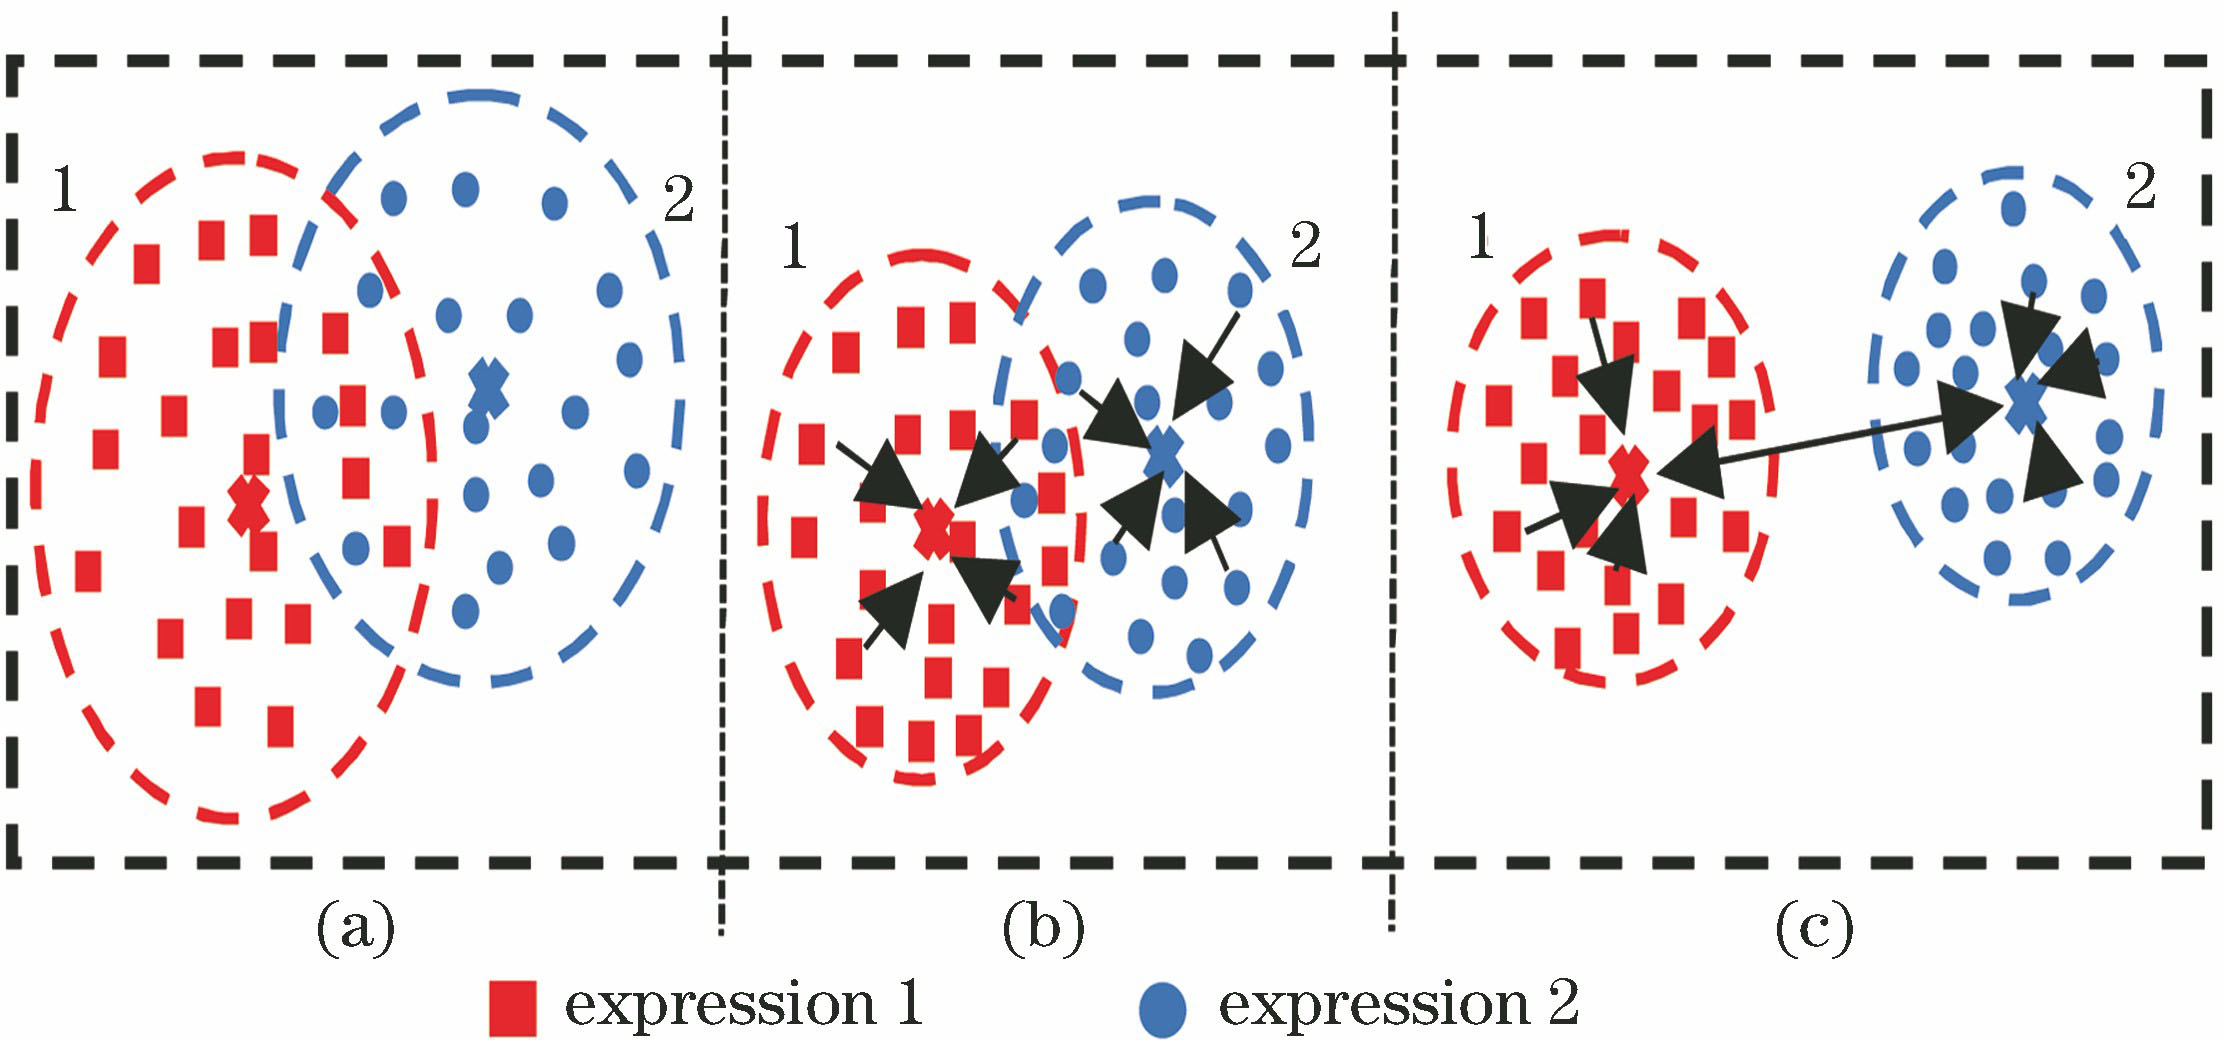 Depth feature diagrams learned by three loss functions. (a) Softmax loss; (b) Center loss; (c) Island loss